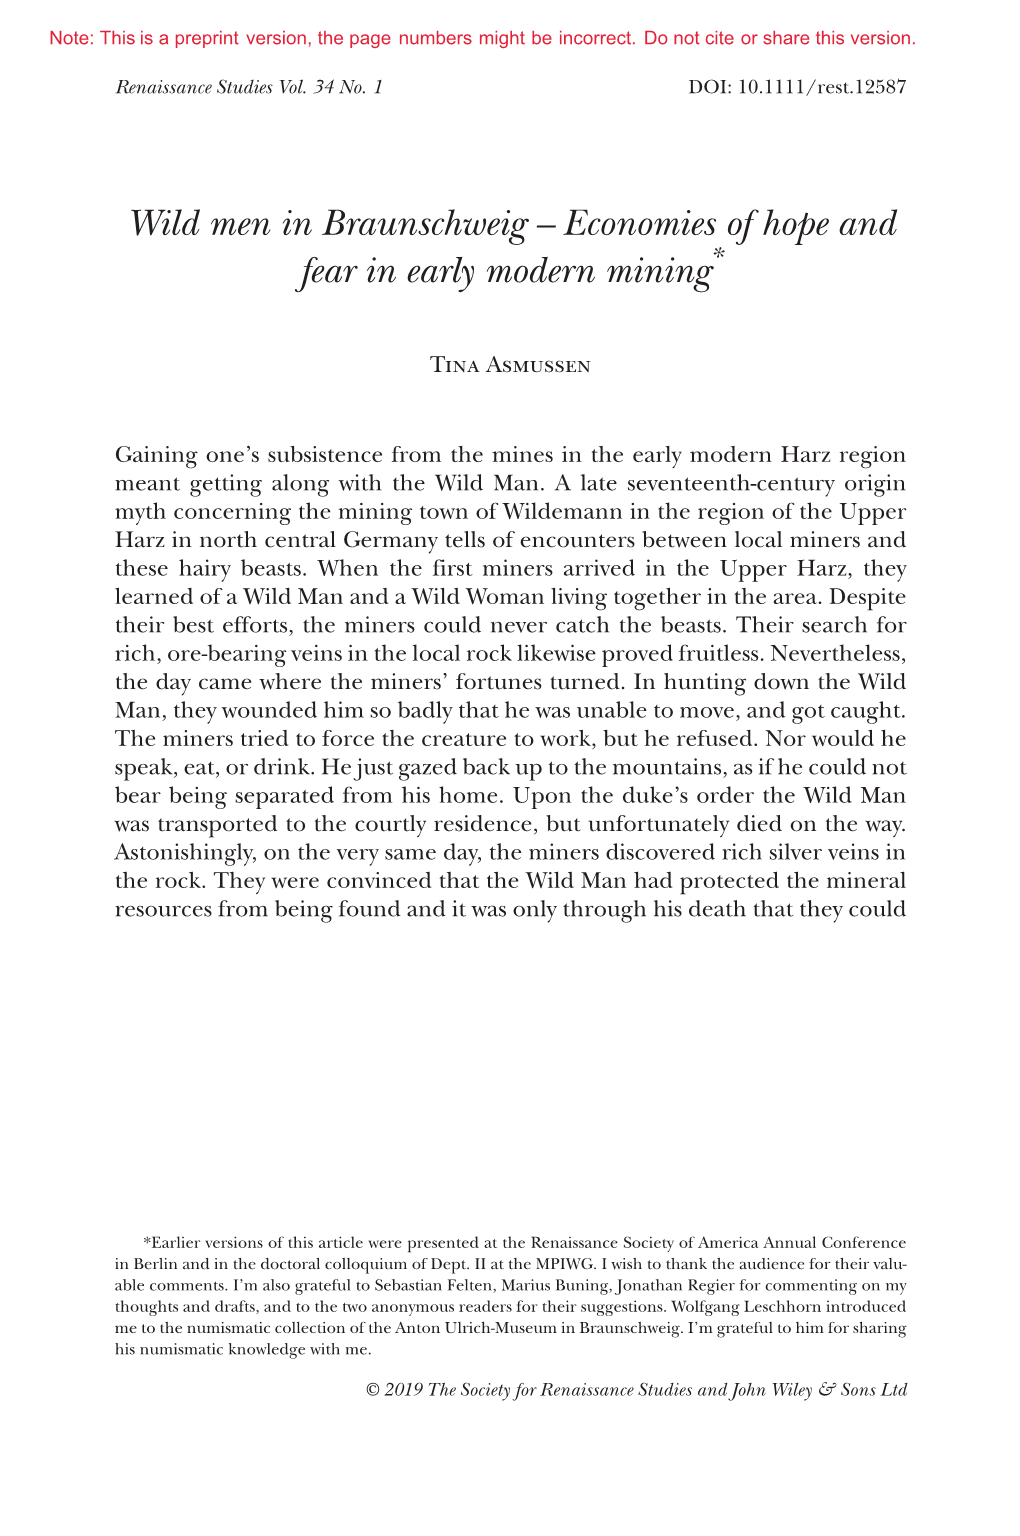 Wild Men in Braunschweig – Economies of Hope and Fear in Early Modern Mining*